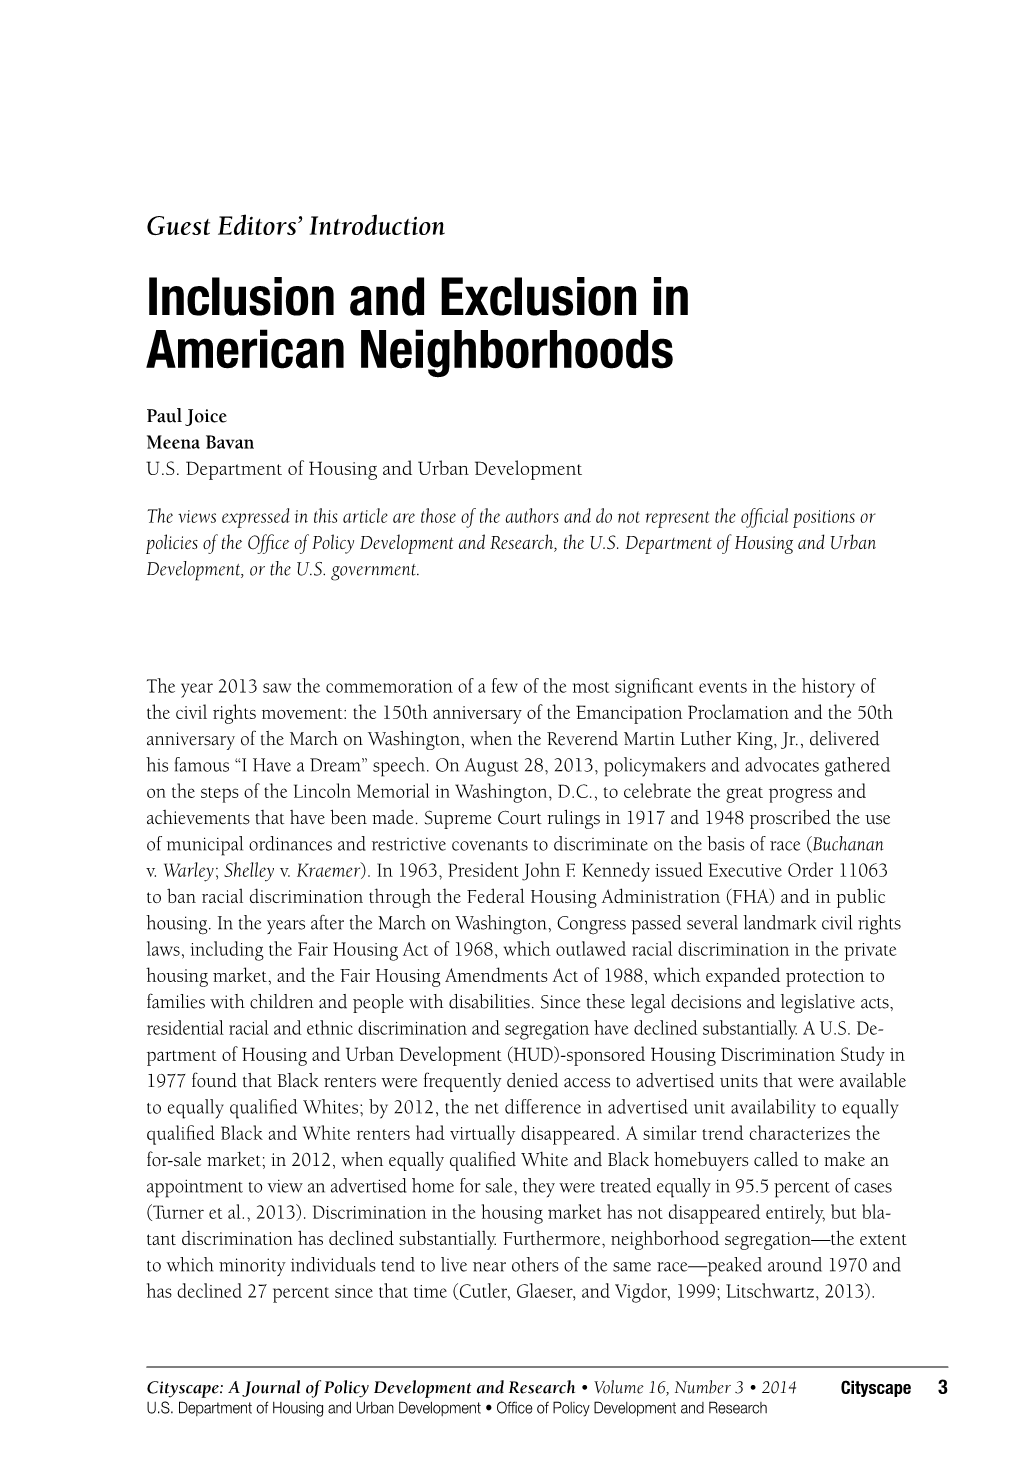 Inclusion and Exclusion in American Neighborhoods